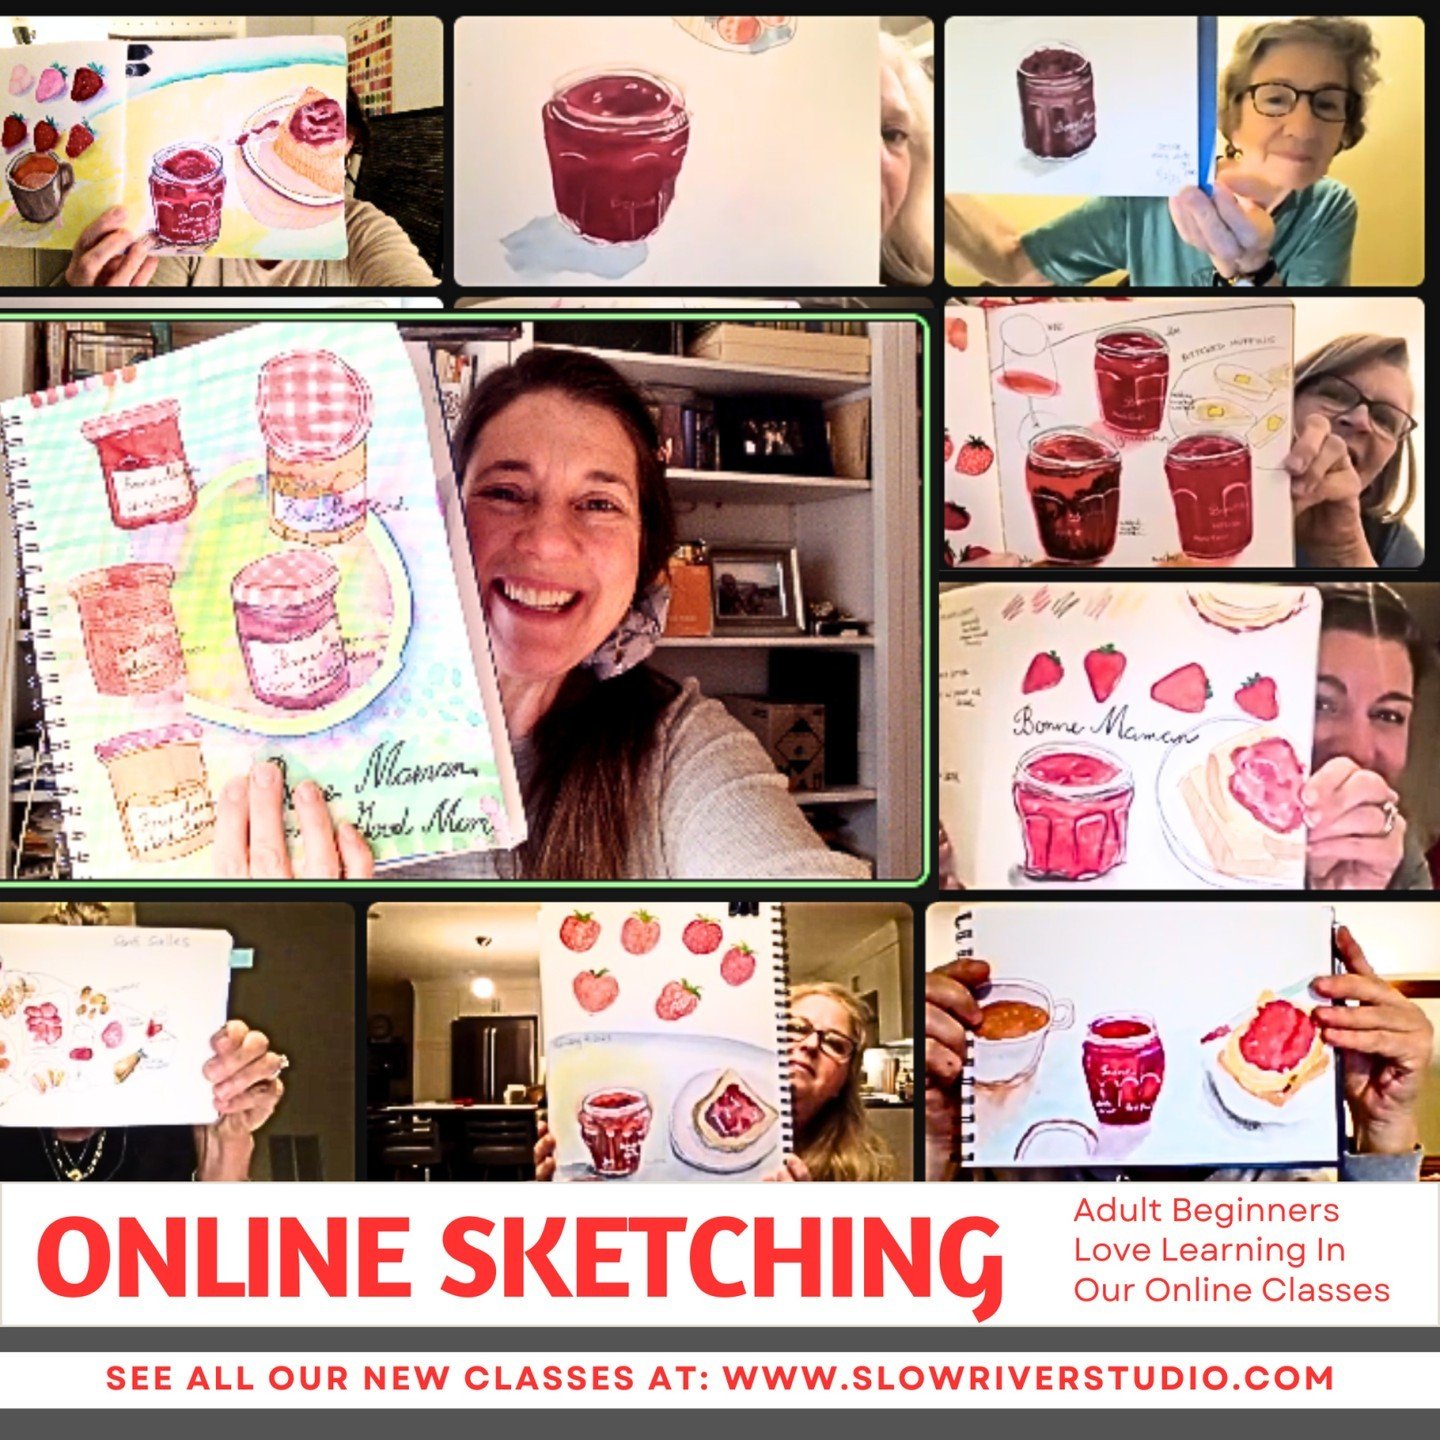 Unleash your inner artist!  Our online sketching classes are starting soon and we can't wait to see what you create! 🎉

Our amazing instructor Jonti is not only an excellent teacher, she also creates a supportive and playful environment for all her 